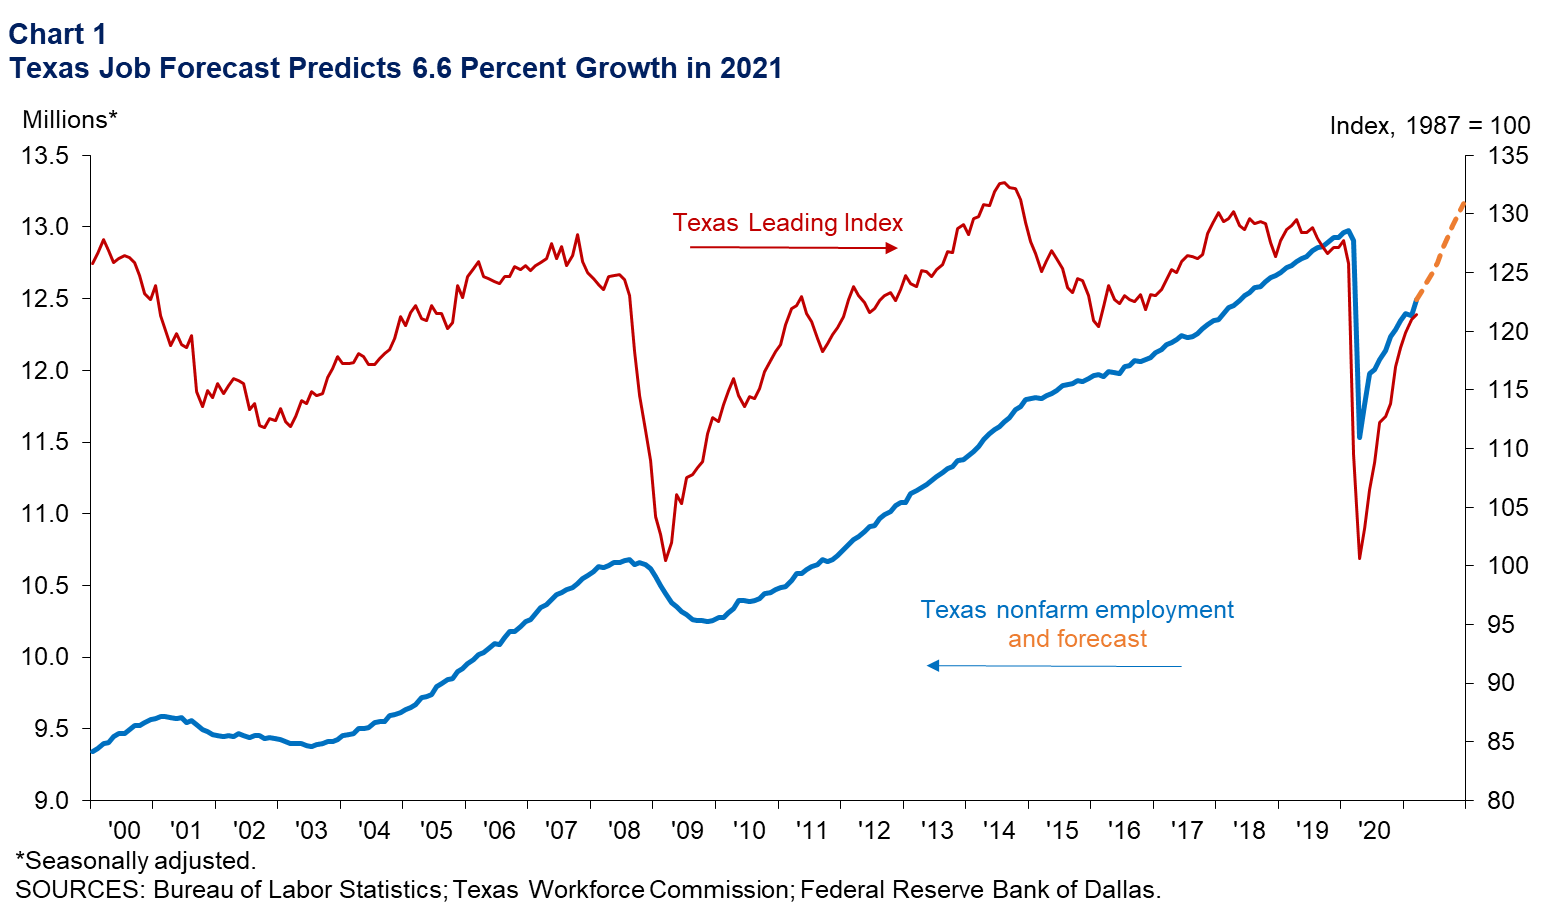 Texas Job Forecast Predicts 6.6 Percent Growth in 2021